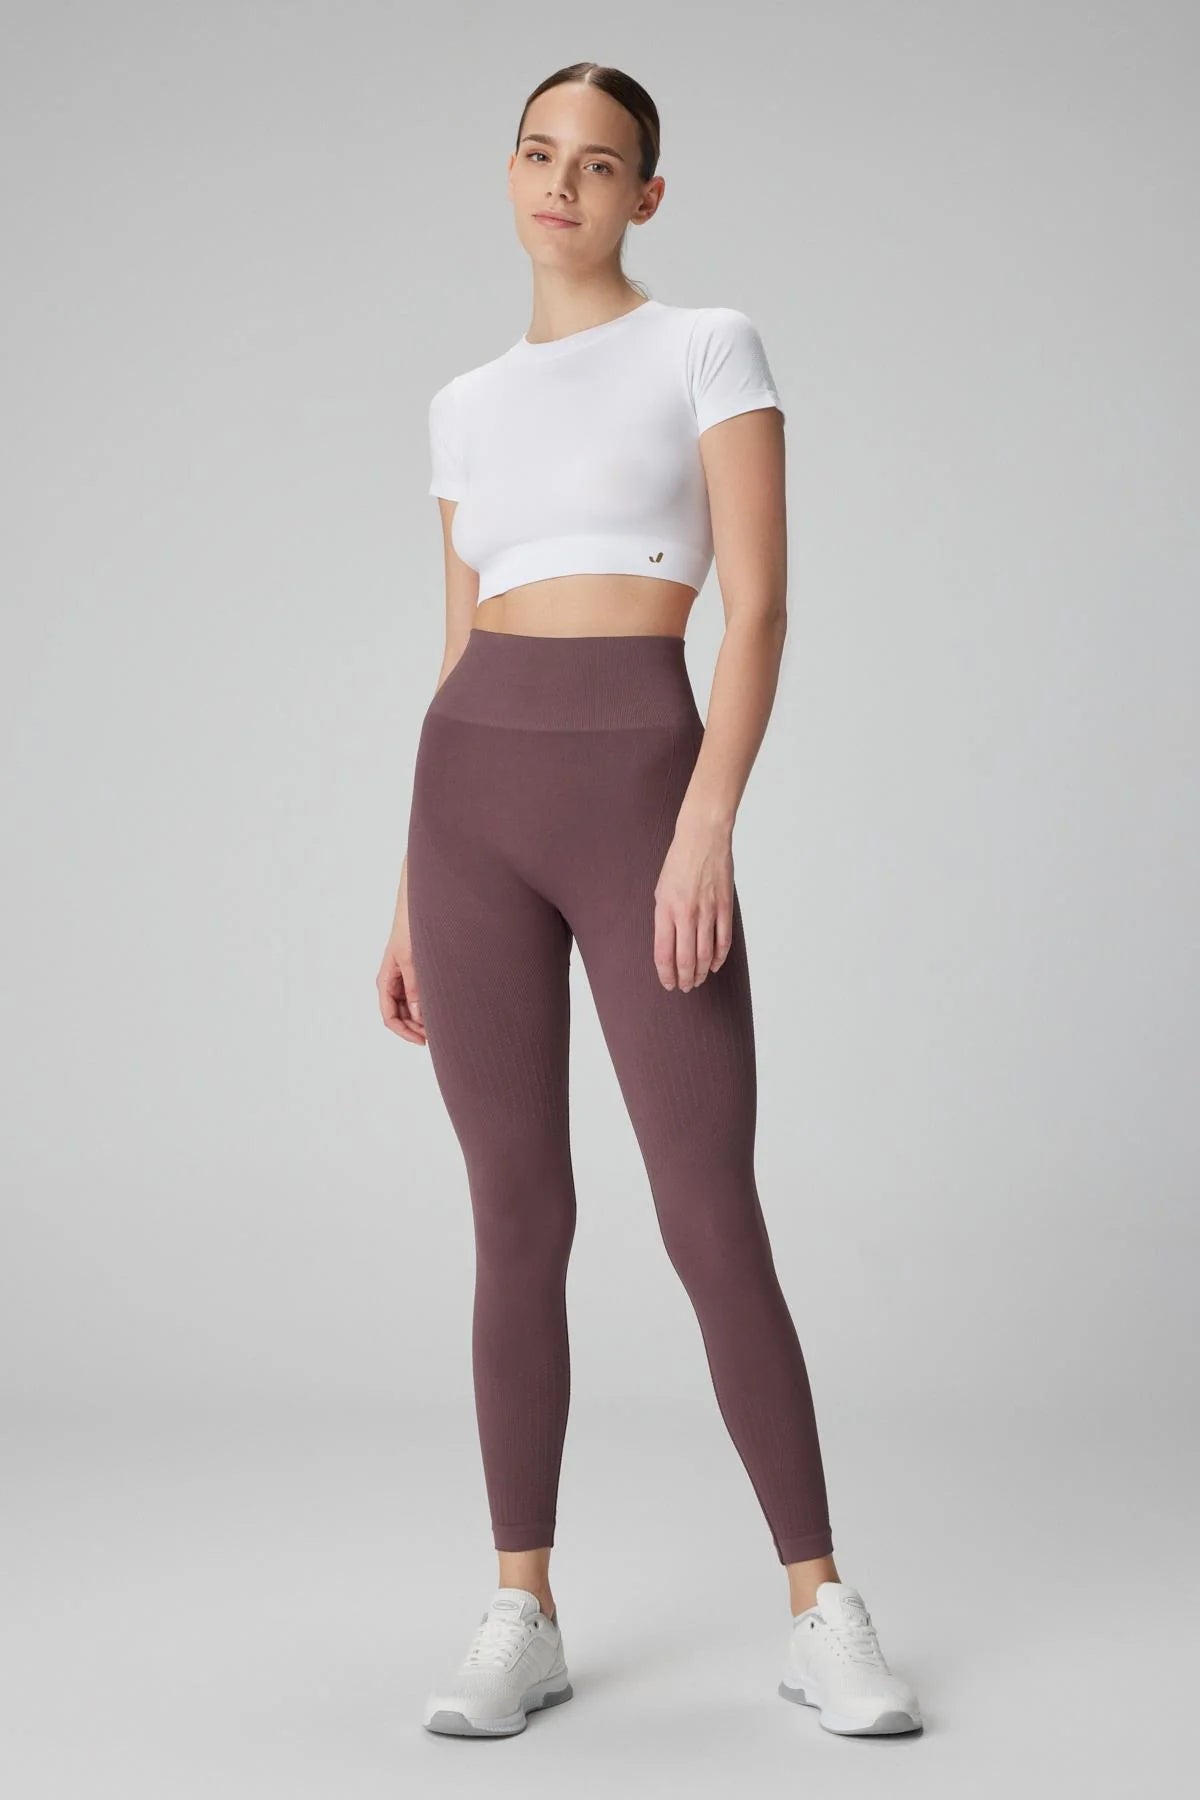 Lily Leggings in Almond Brown